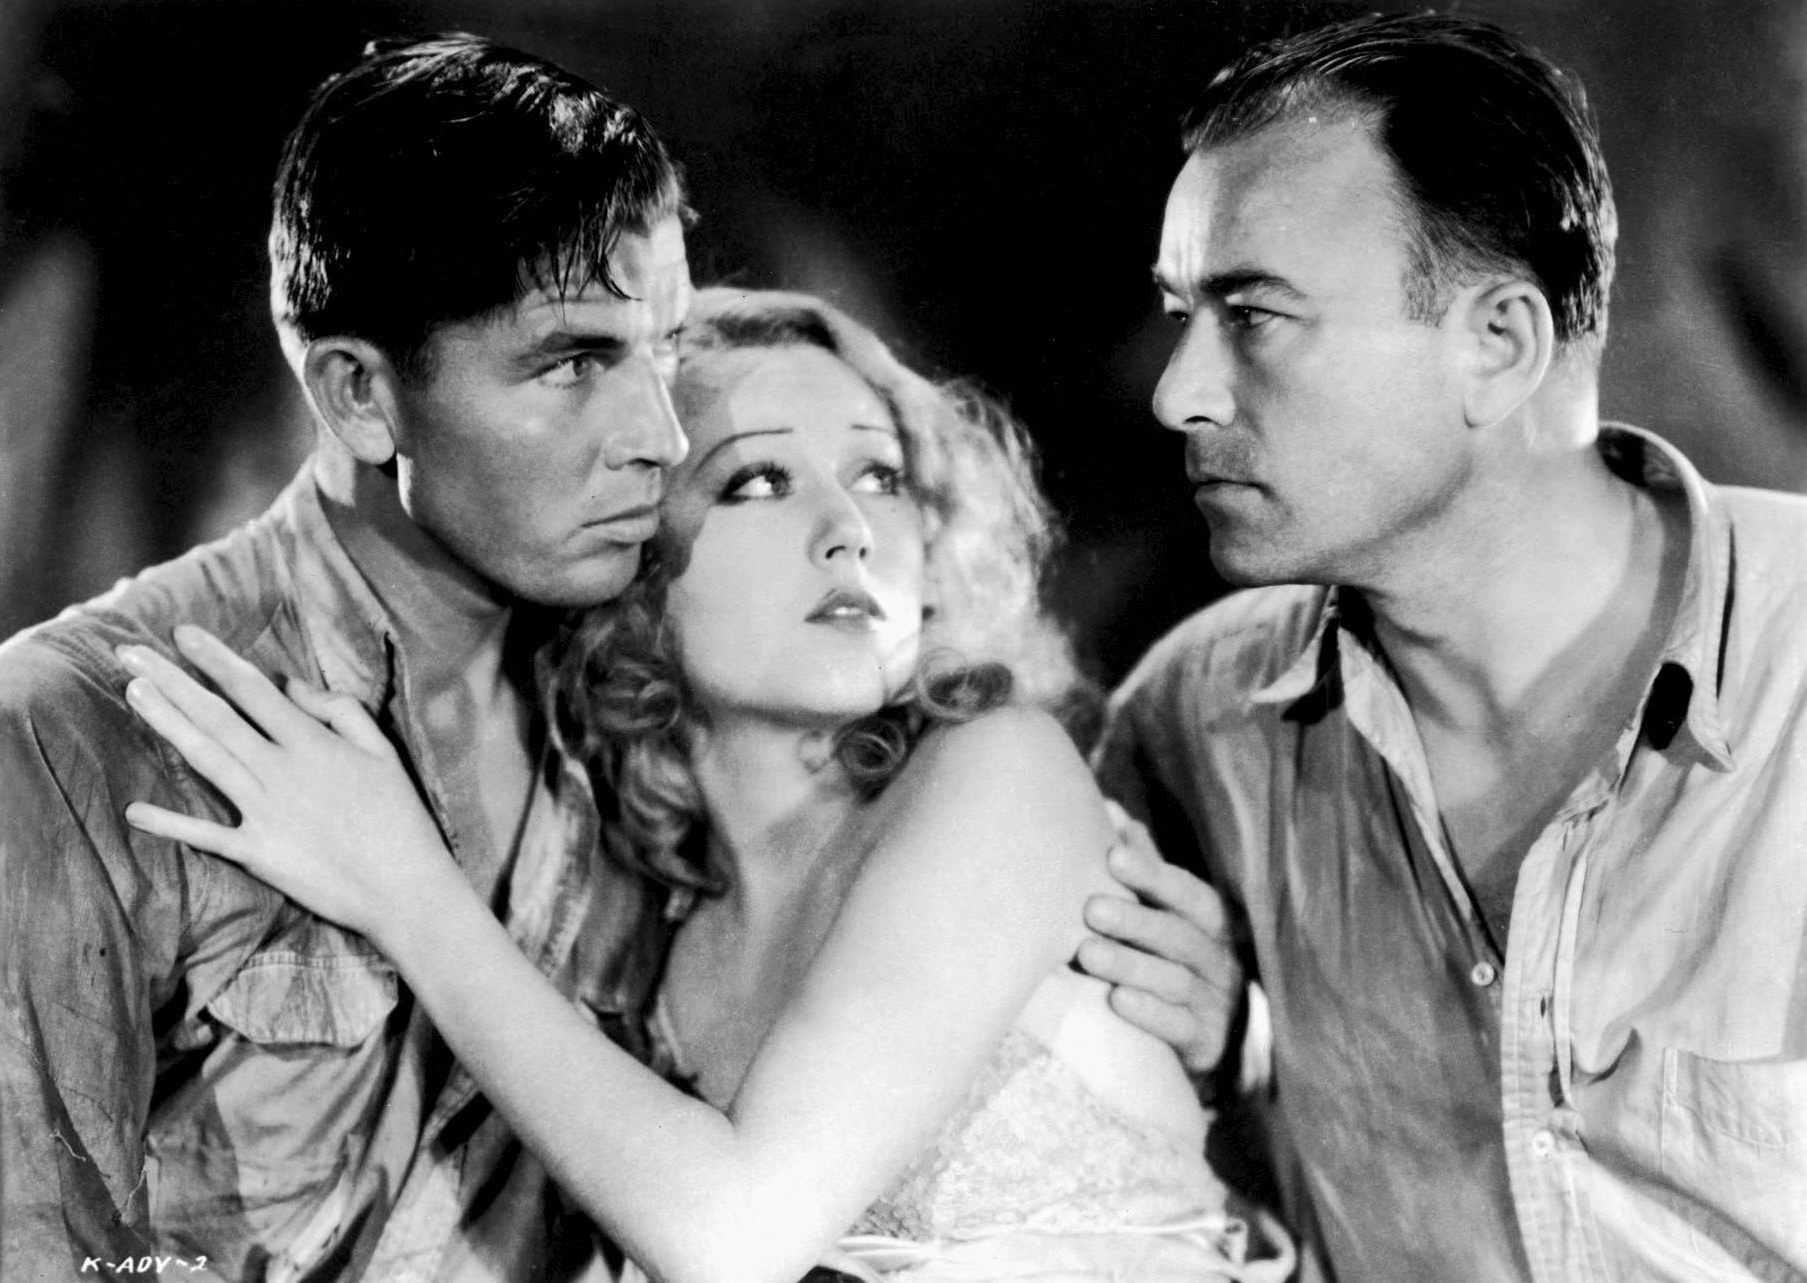 Still of Robert Armstrong, Bruce Cabot and Fay Wray in King Kong (1933)